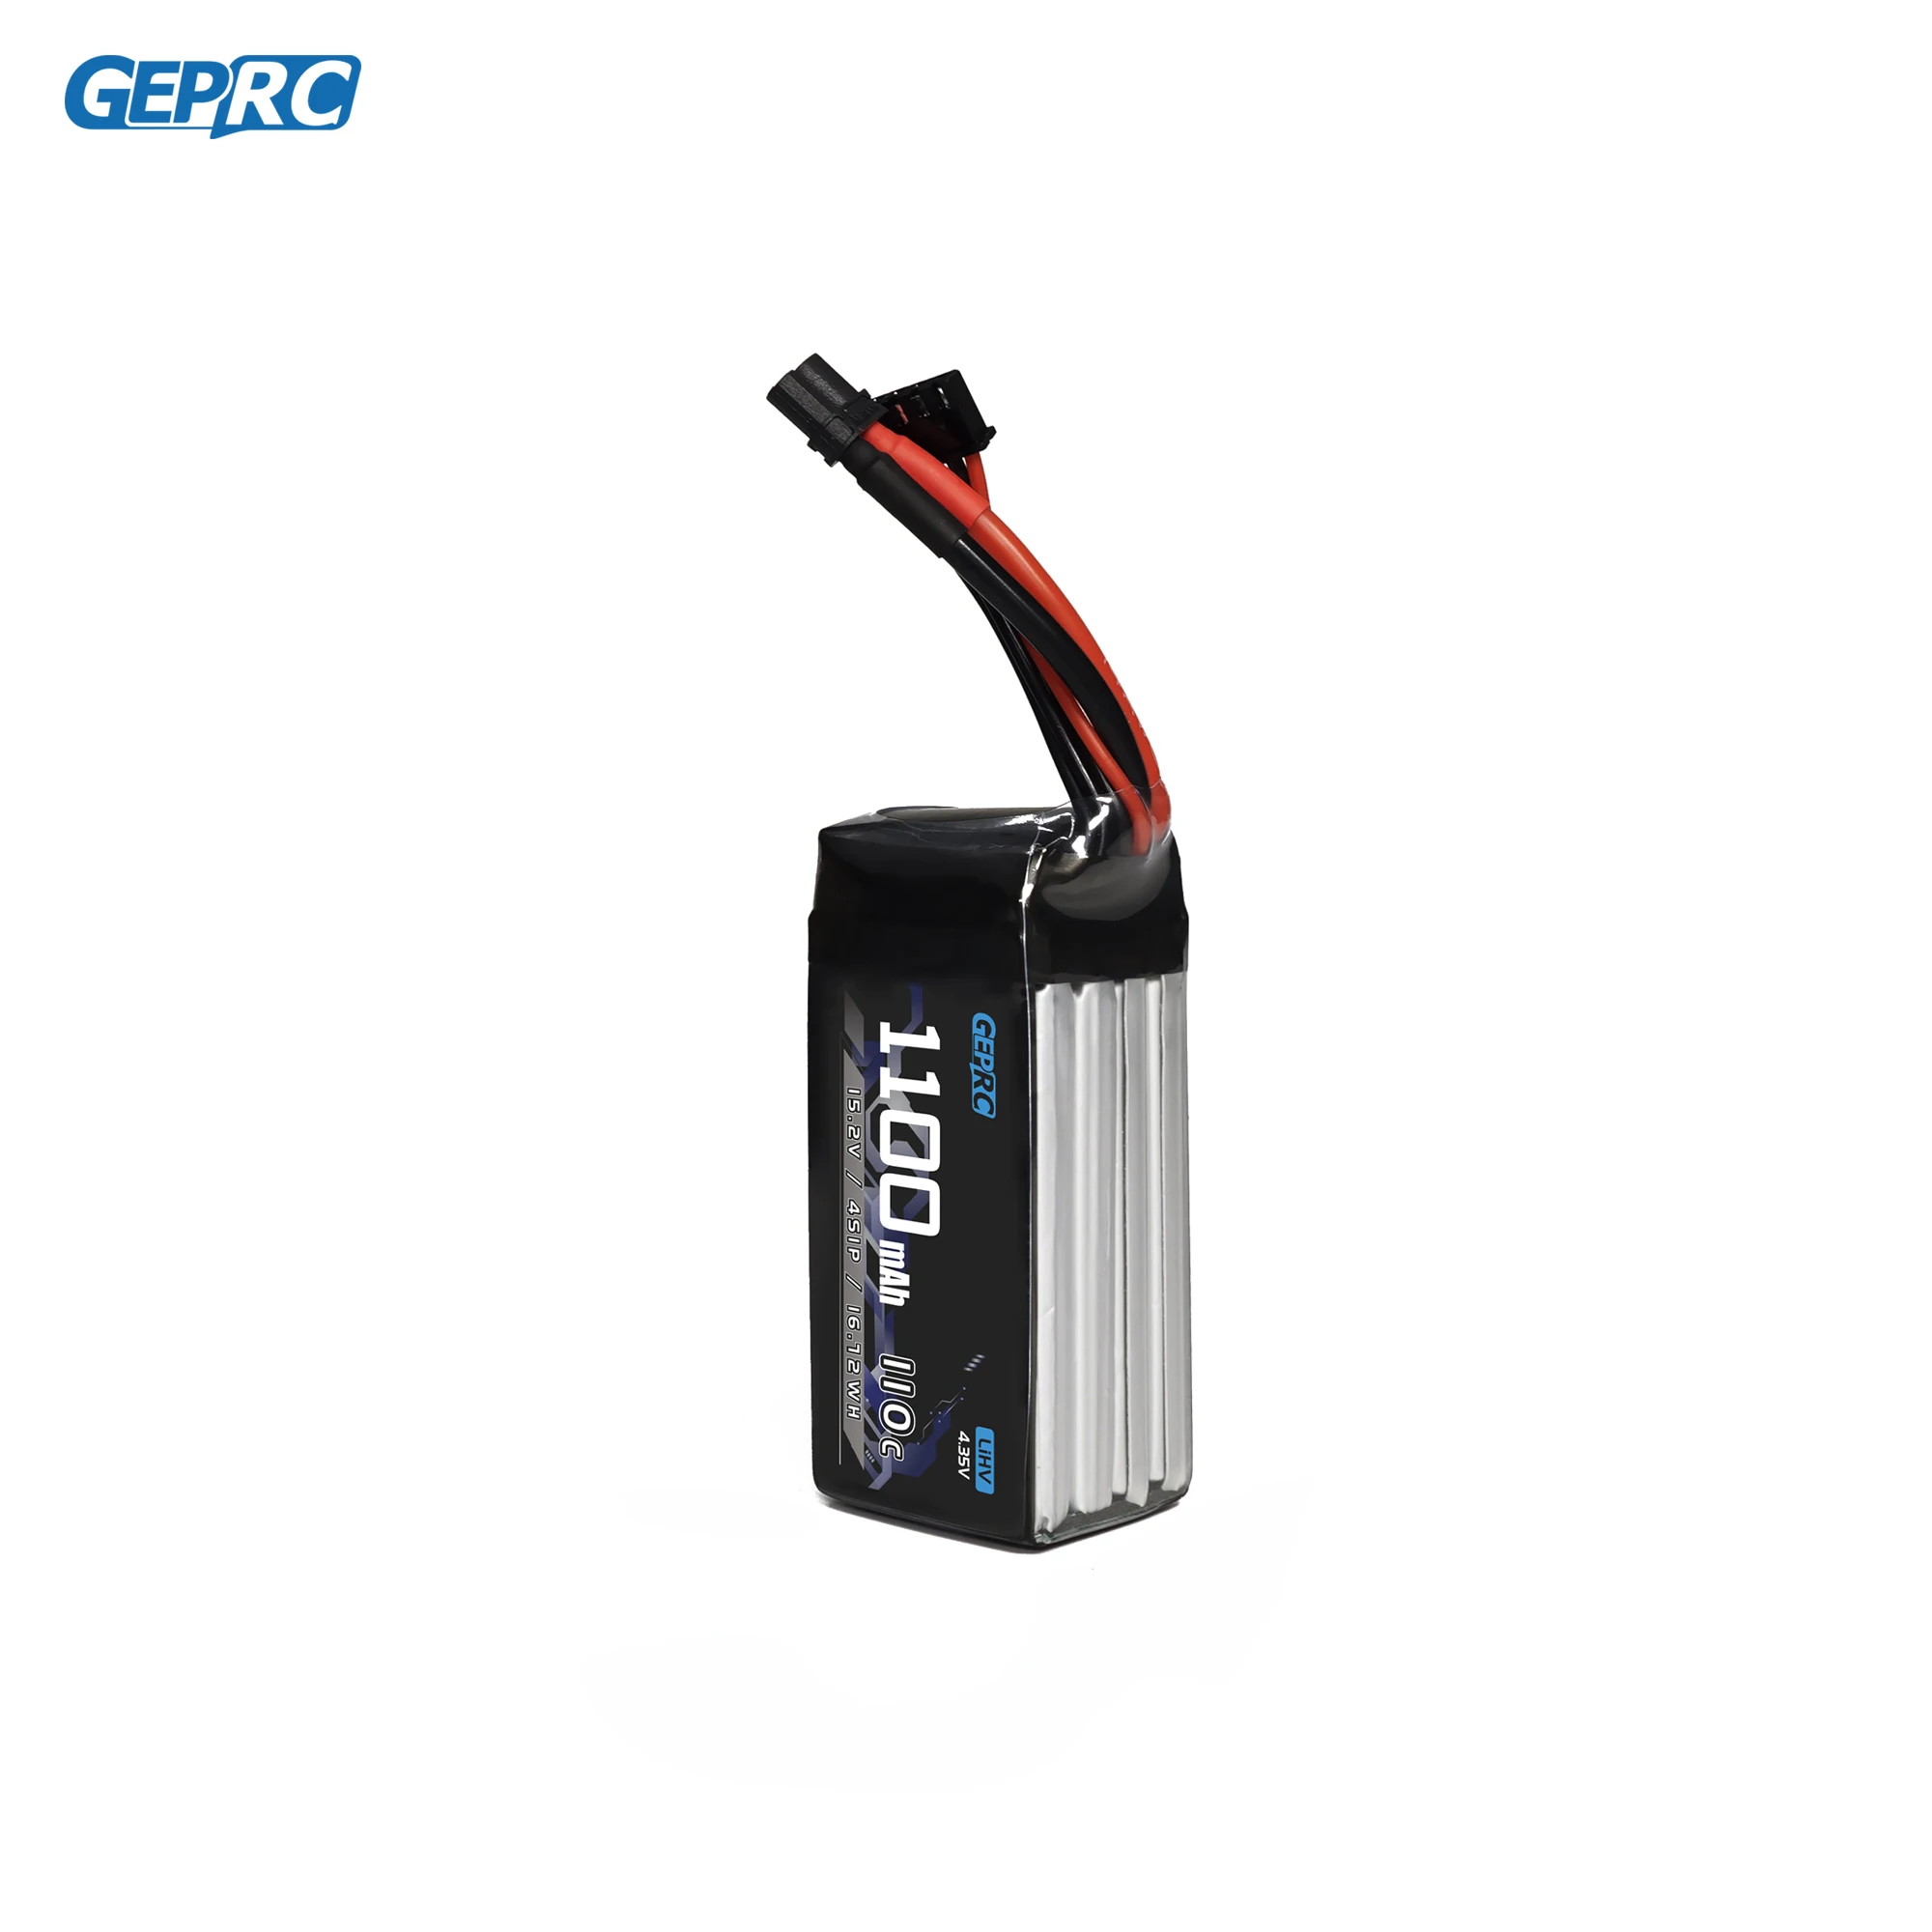 GEPRC 4S 1100mAh 110C LiPo Battery Suitable For 3-5Inch Series Drone For RC FPV Quadcopter Freestyle Drone Accessories Parts